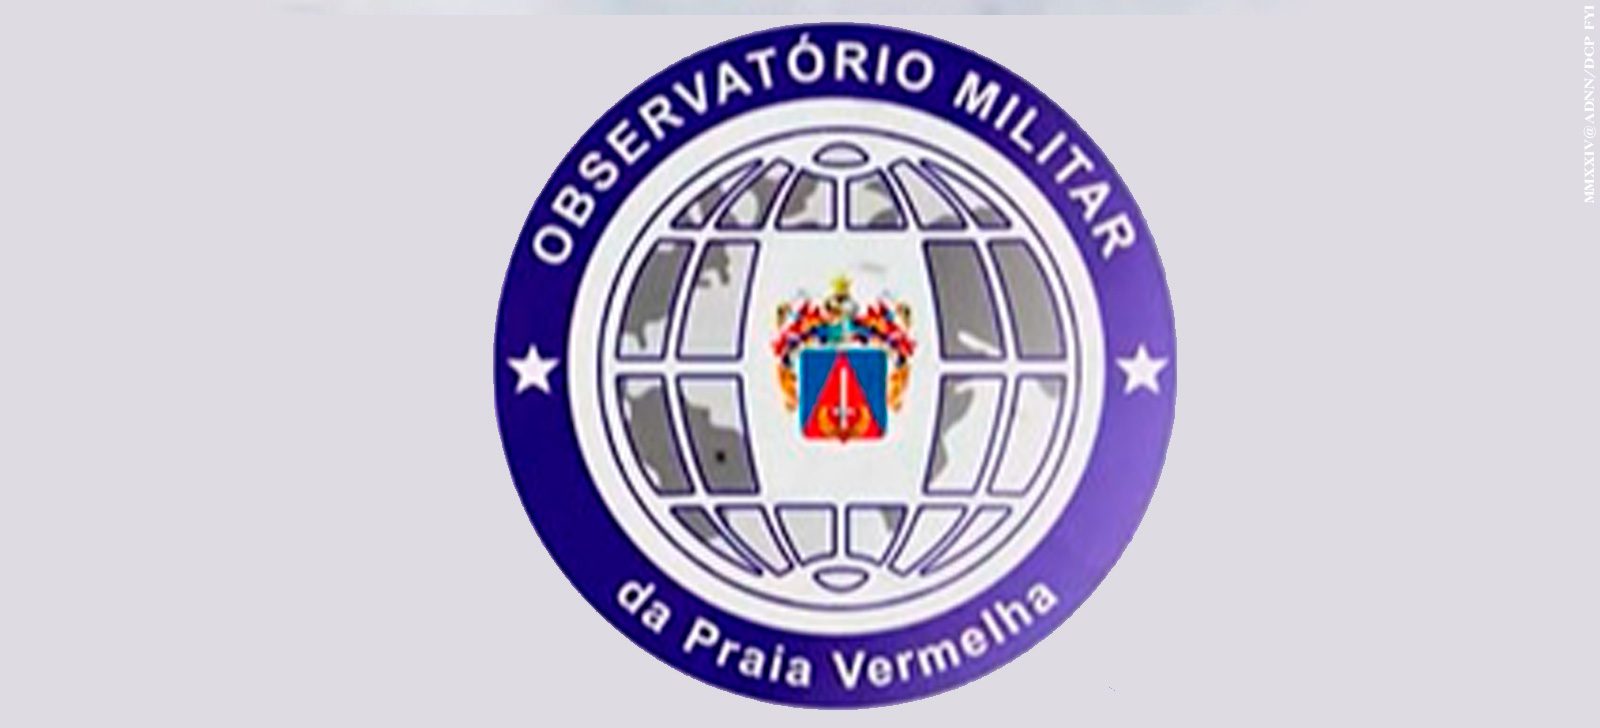 Praia Vermelha Military Observatory launches area to discuss technology and defense